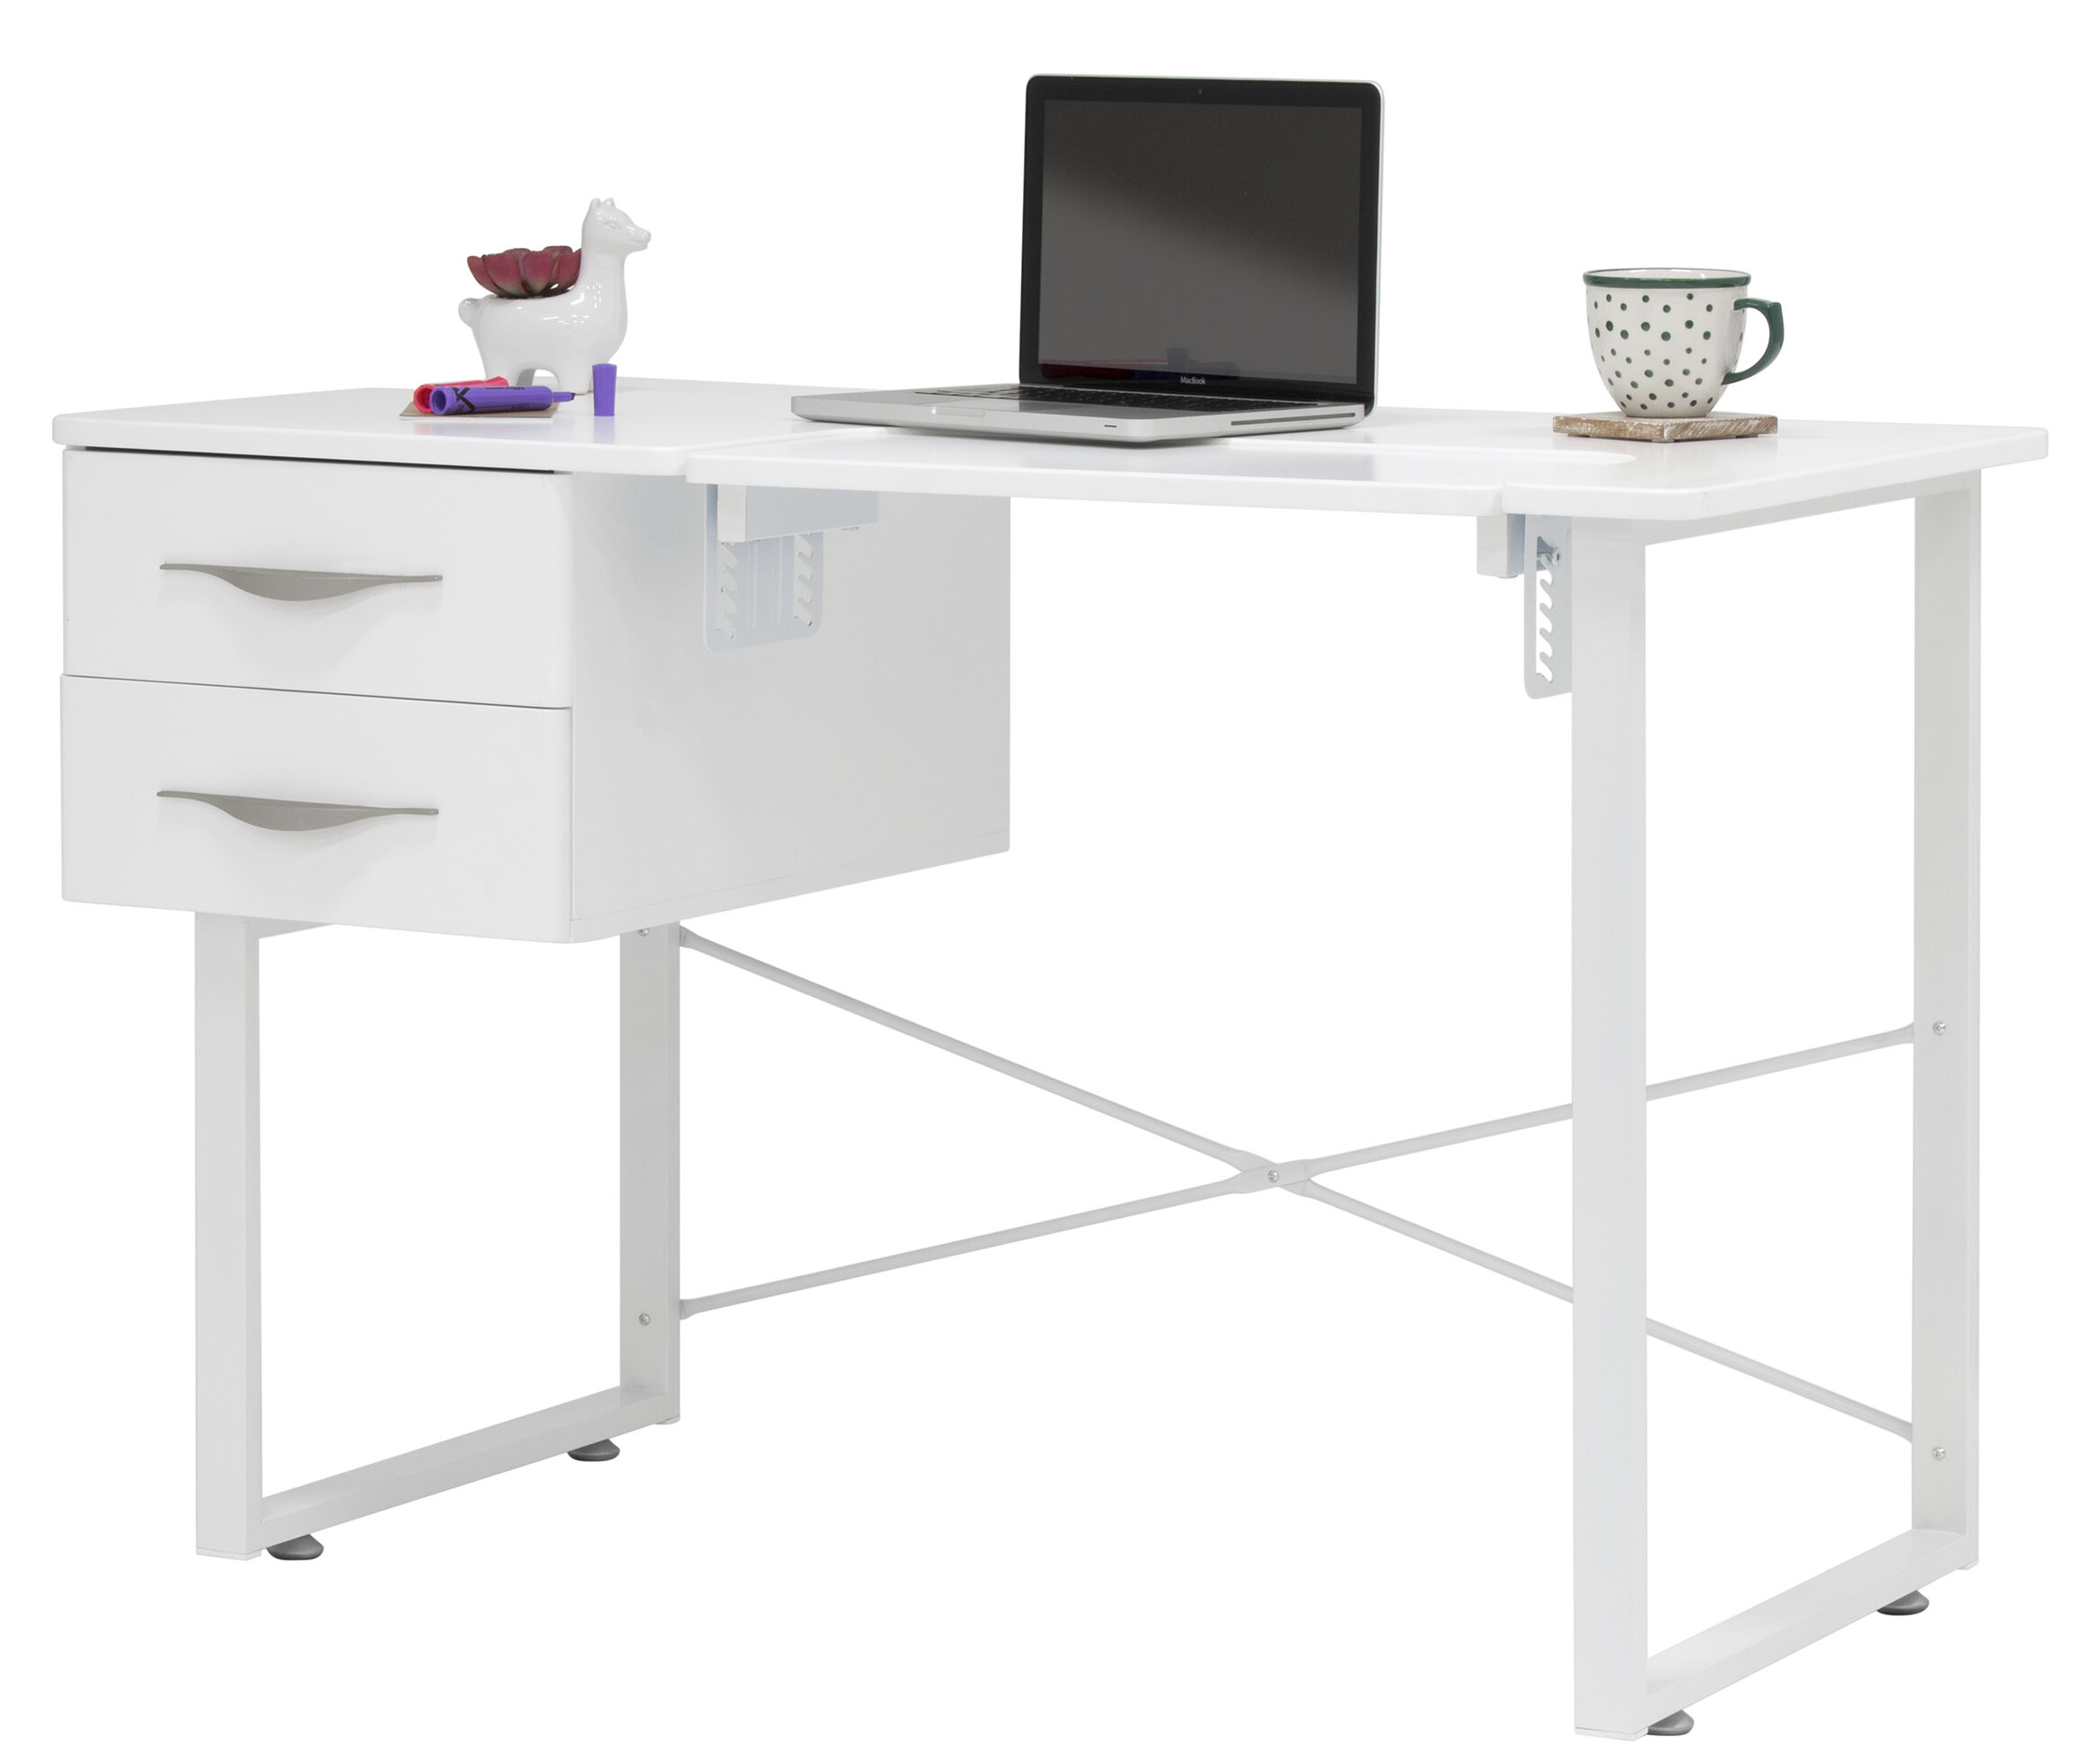 Reviews for Sew Ready Hobby Craft 60 in. W x 36 in. D MDF Folding Fabric  Cutting Table with Drawers, Adjustable Height, Silver / White